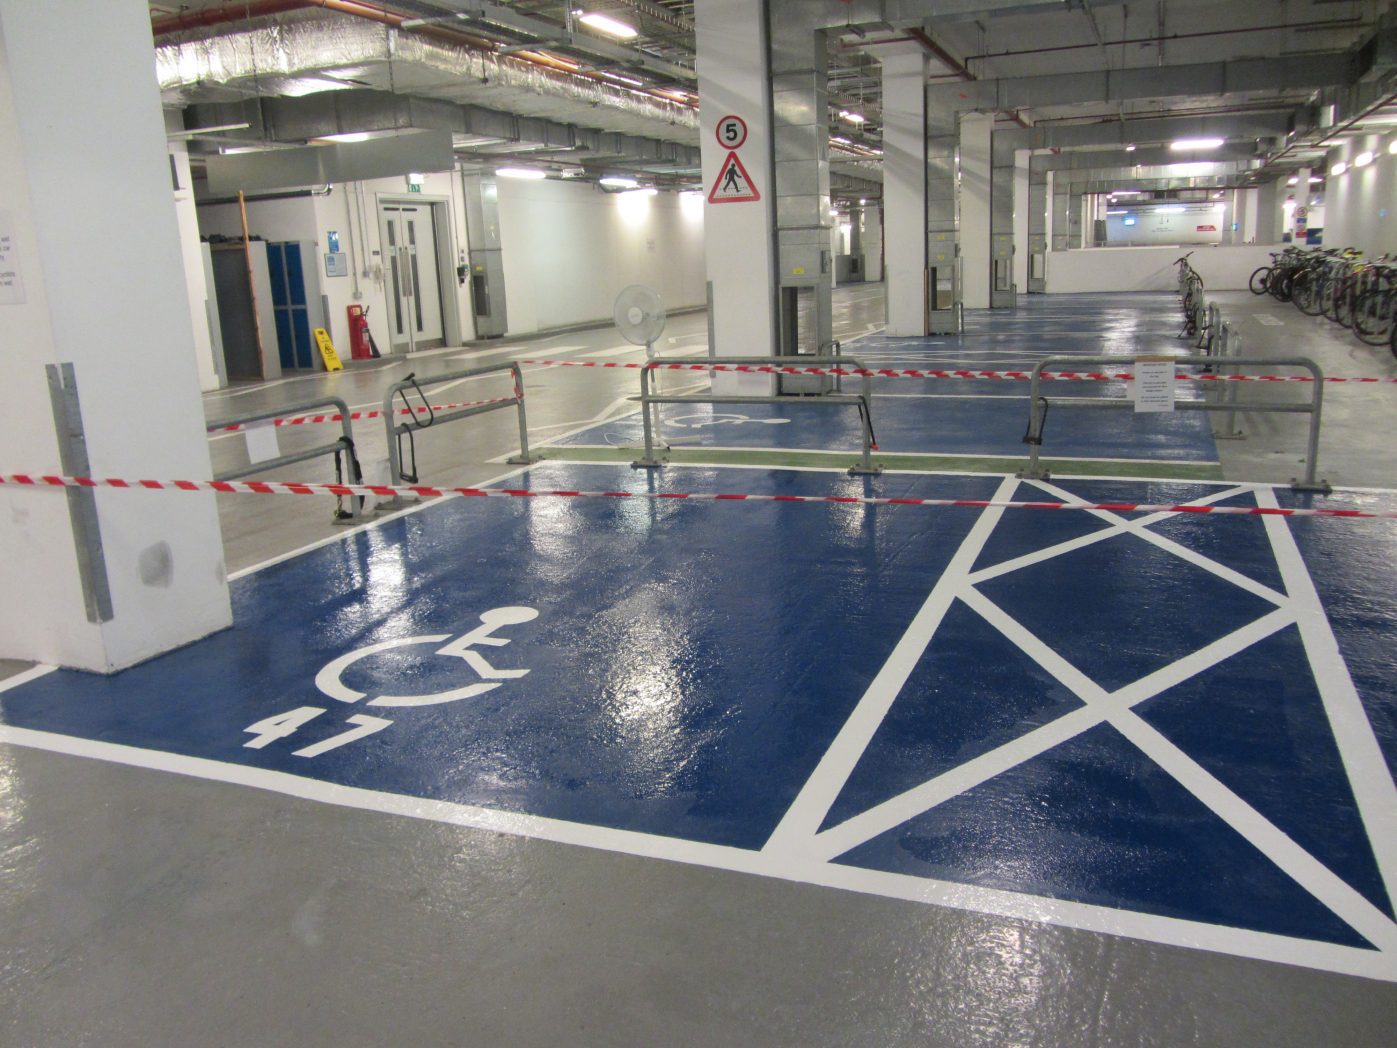 The Home Office Parking Bays